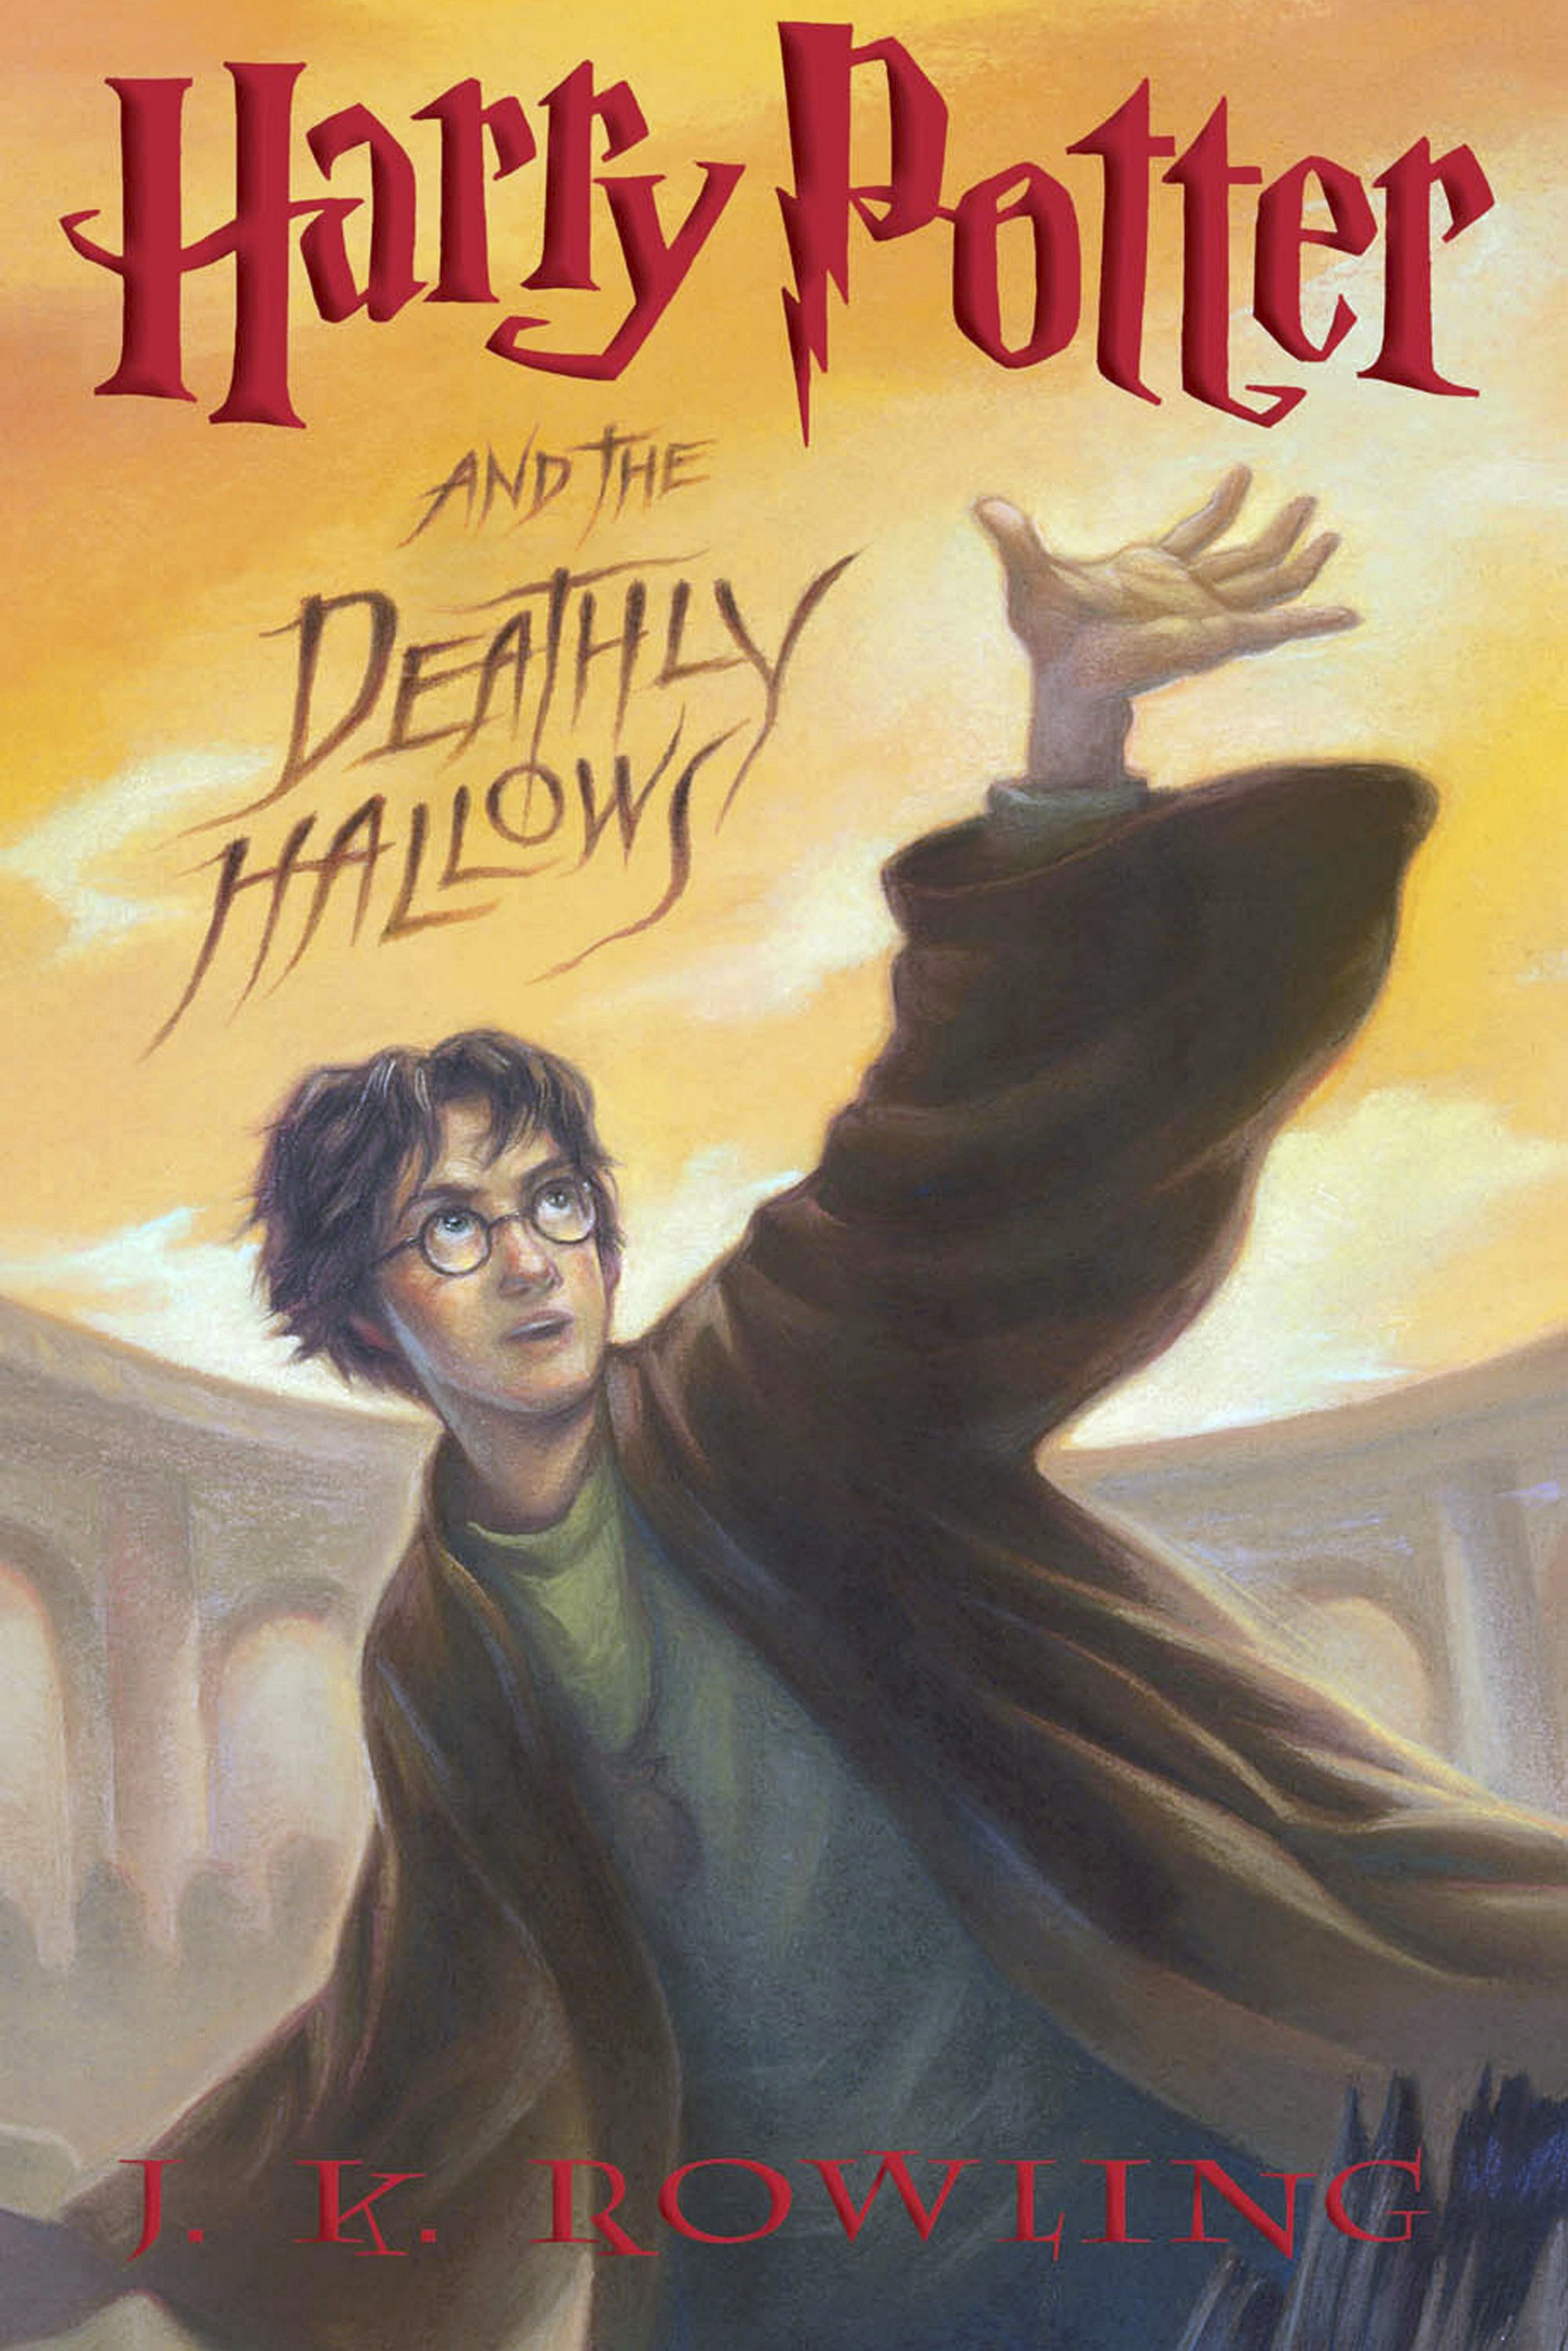 'Harry Potter and the Deathly Hallows' by JK Rowling is the final book in the series.